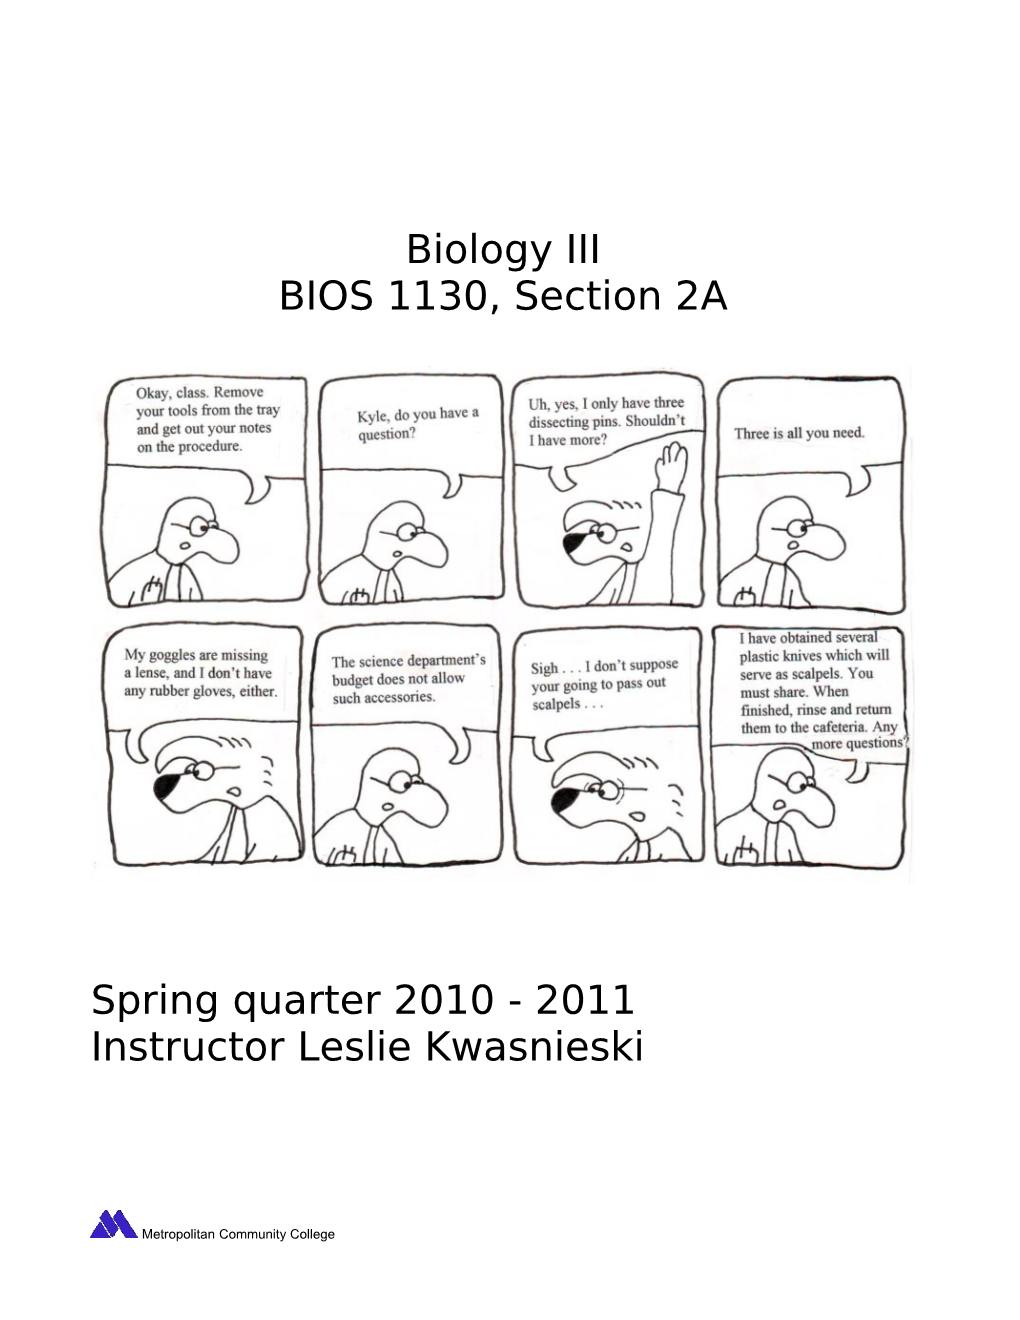 BIOS 1130, Section 2A